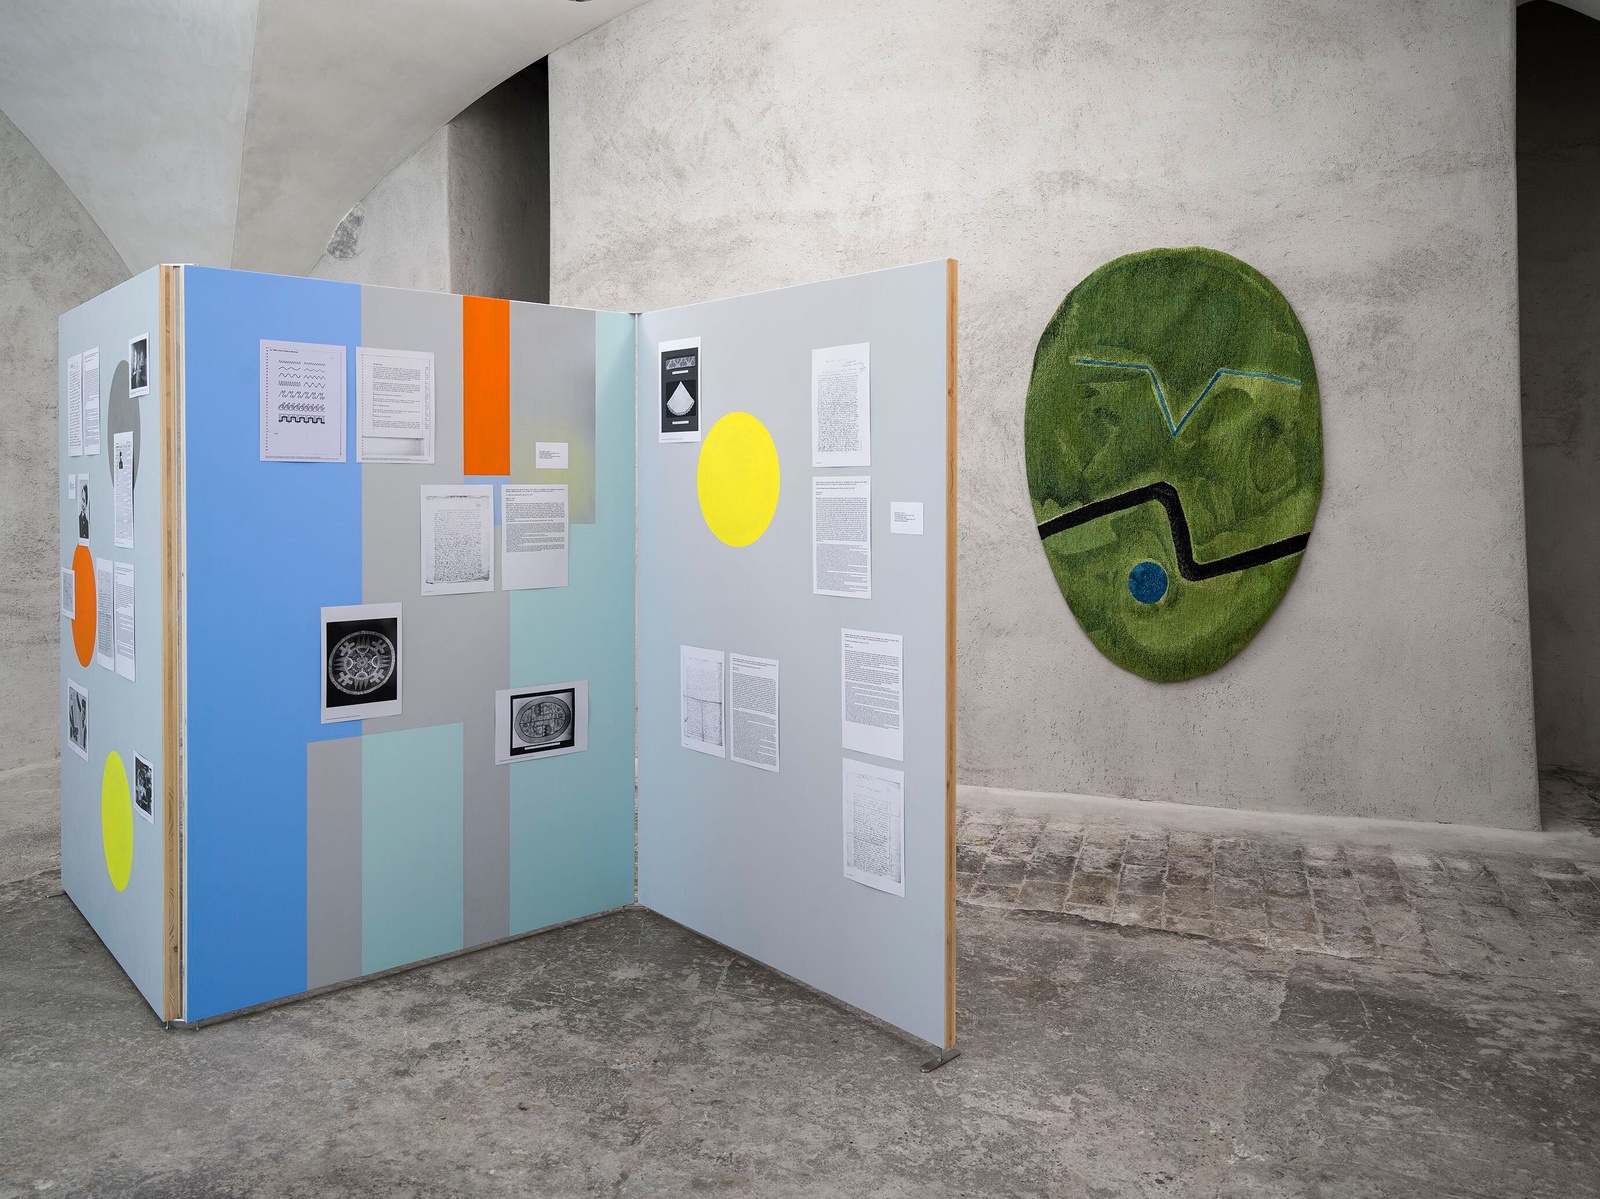 Exhibition view Sophie Taeuber-Arp / Mai-Thu Perret «Ich bin wü ü ü ü ü ü ü ü tend», Mai-Thu Perret, Untitled (for S.T.), 2022 and Untitled (Green Oval), 2018, Cabaret Voltaire 2022. Photo: Cedric Mussano